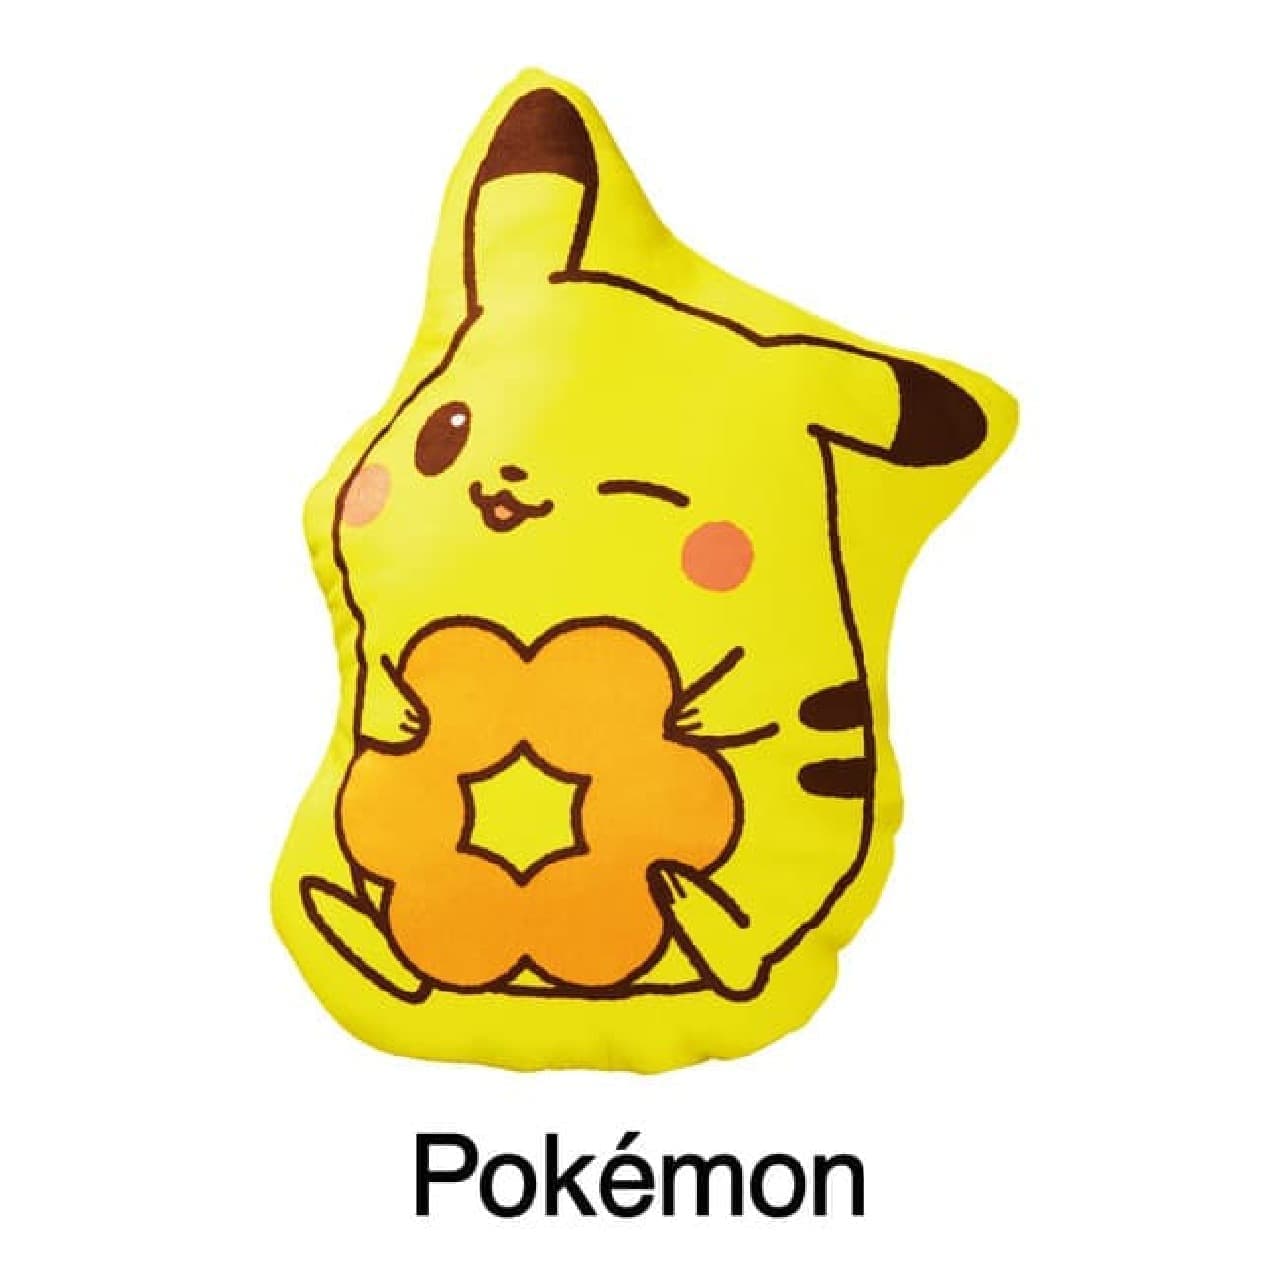 Introducing "Mister Donut Lucky Bag 2022" --Miscellaneous goods such as Pikachu, Eevee, and Piplup! Donut exchange card